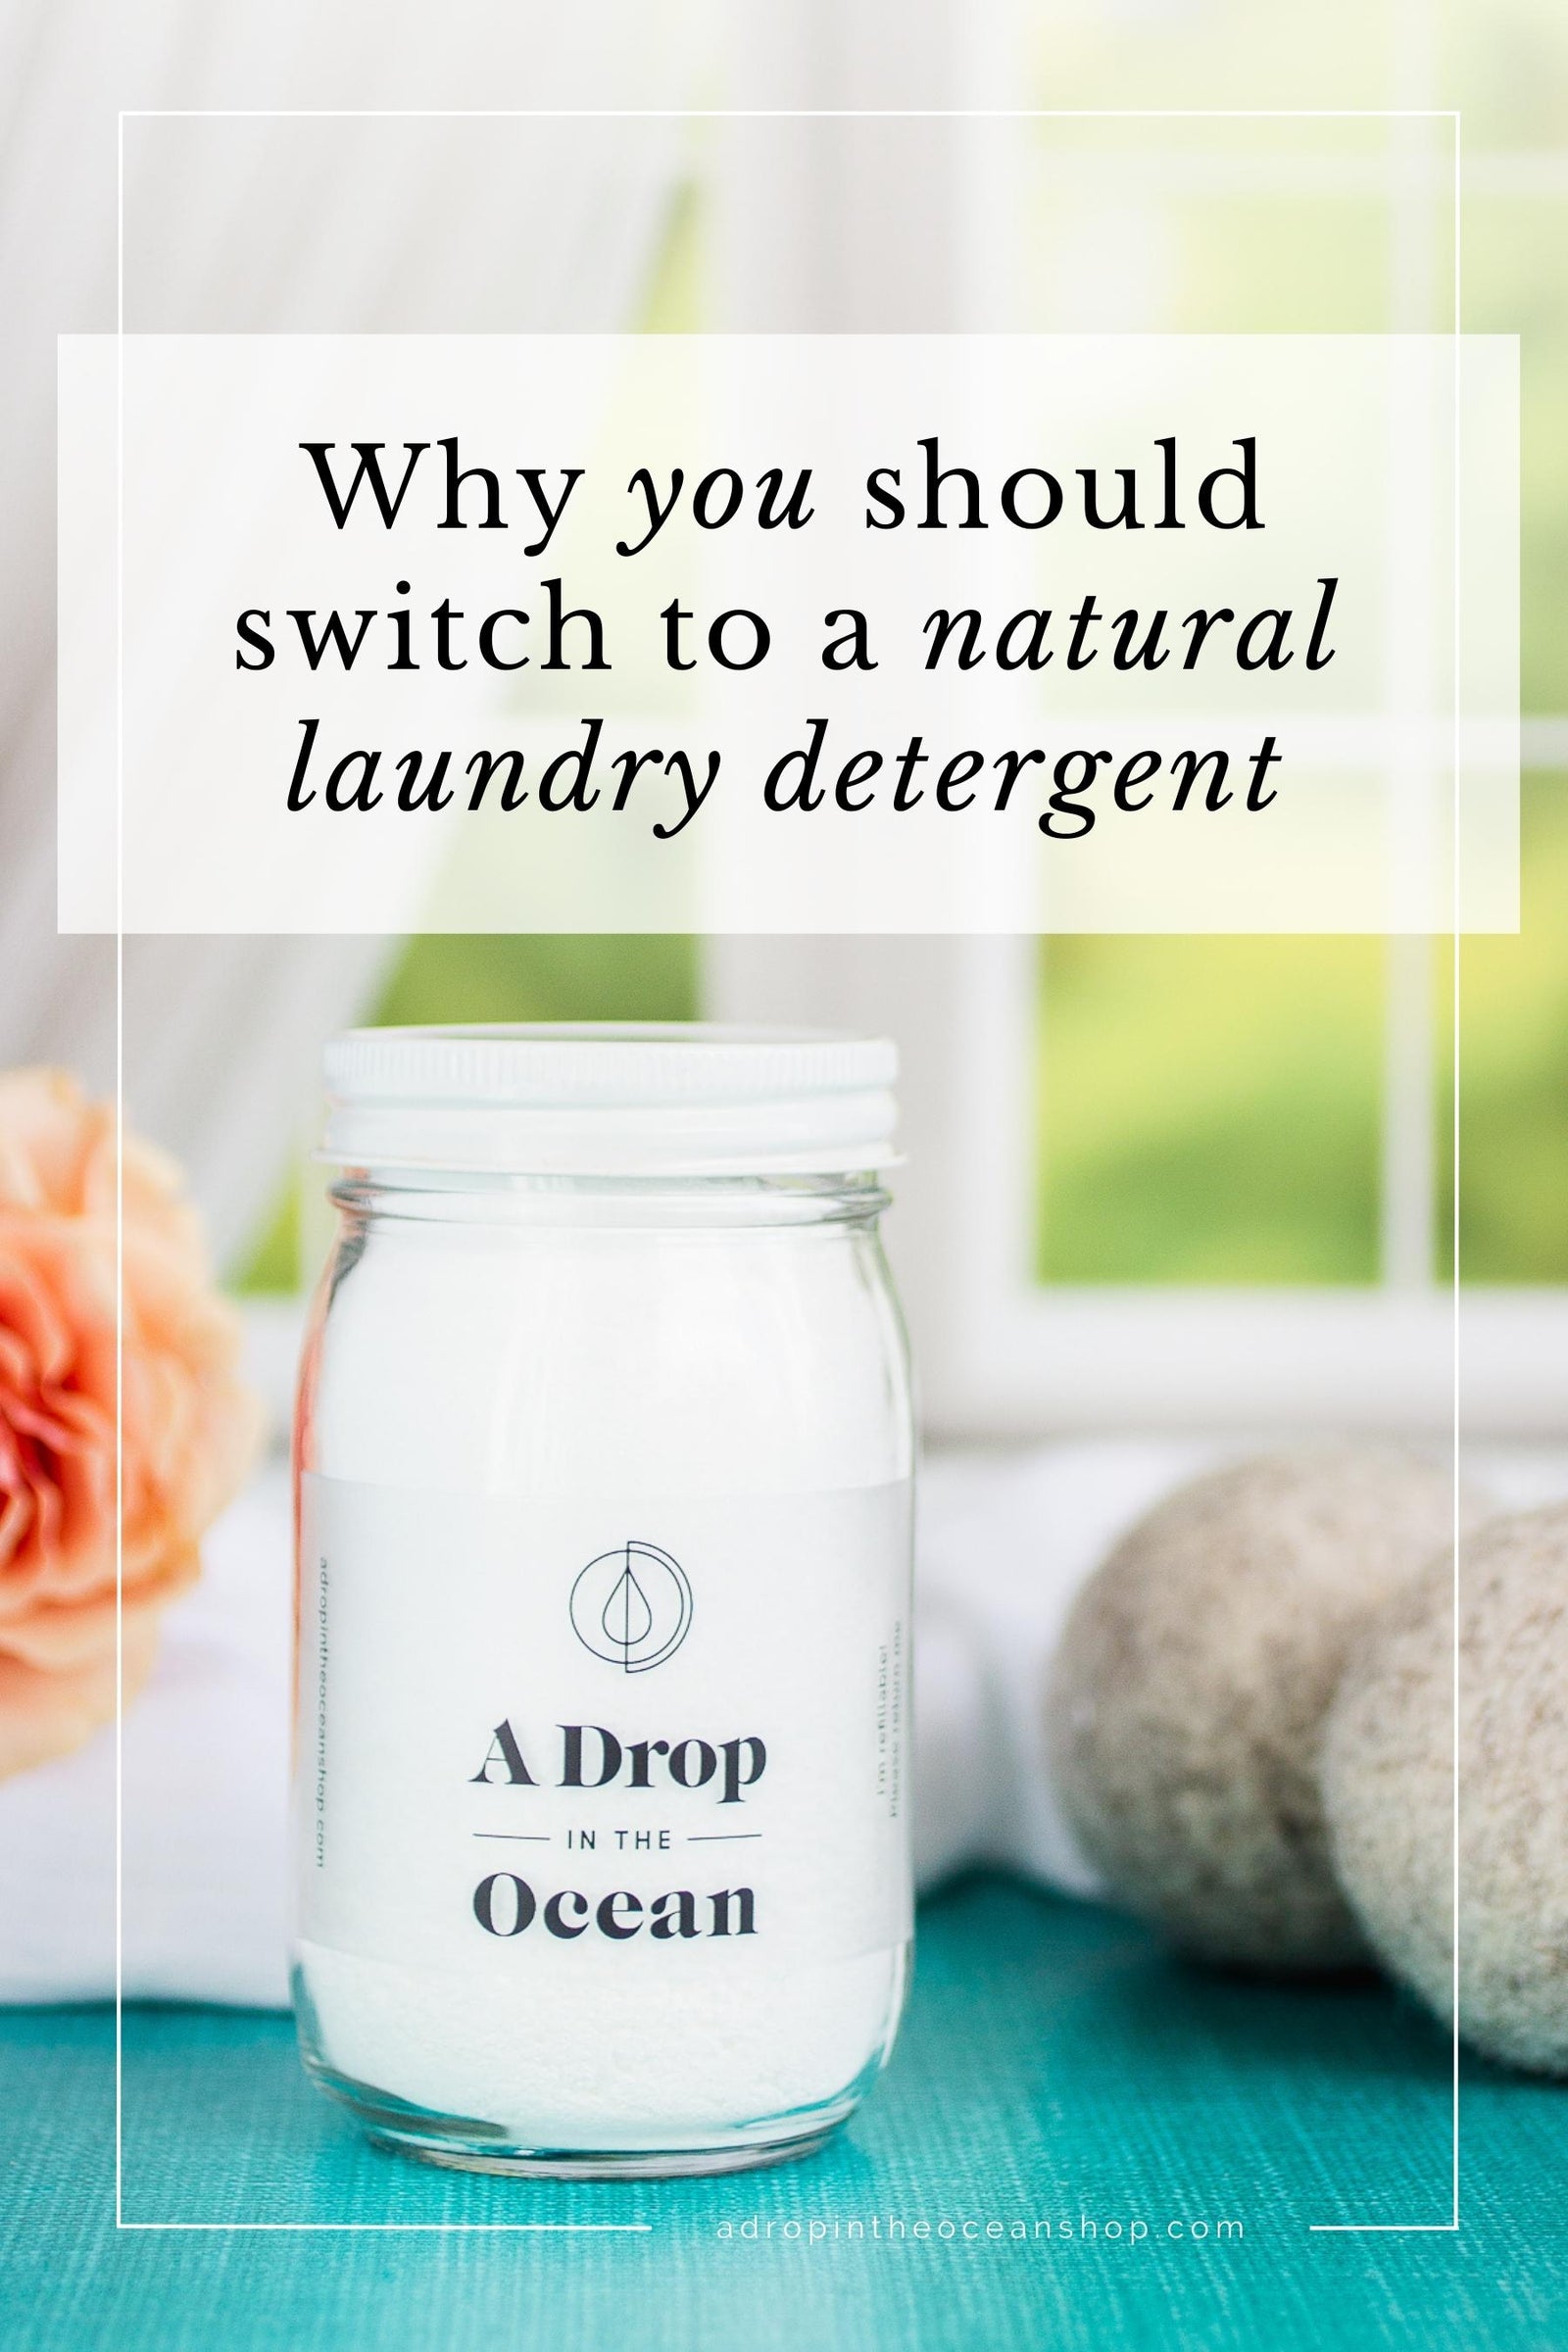 A Drop in the Ocean Zero Waste Store: Why you should switch to a natural laundry detergent